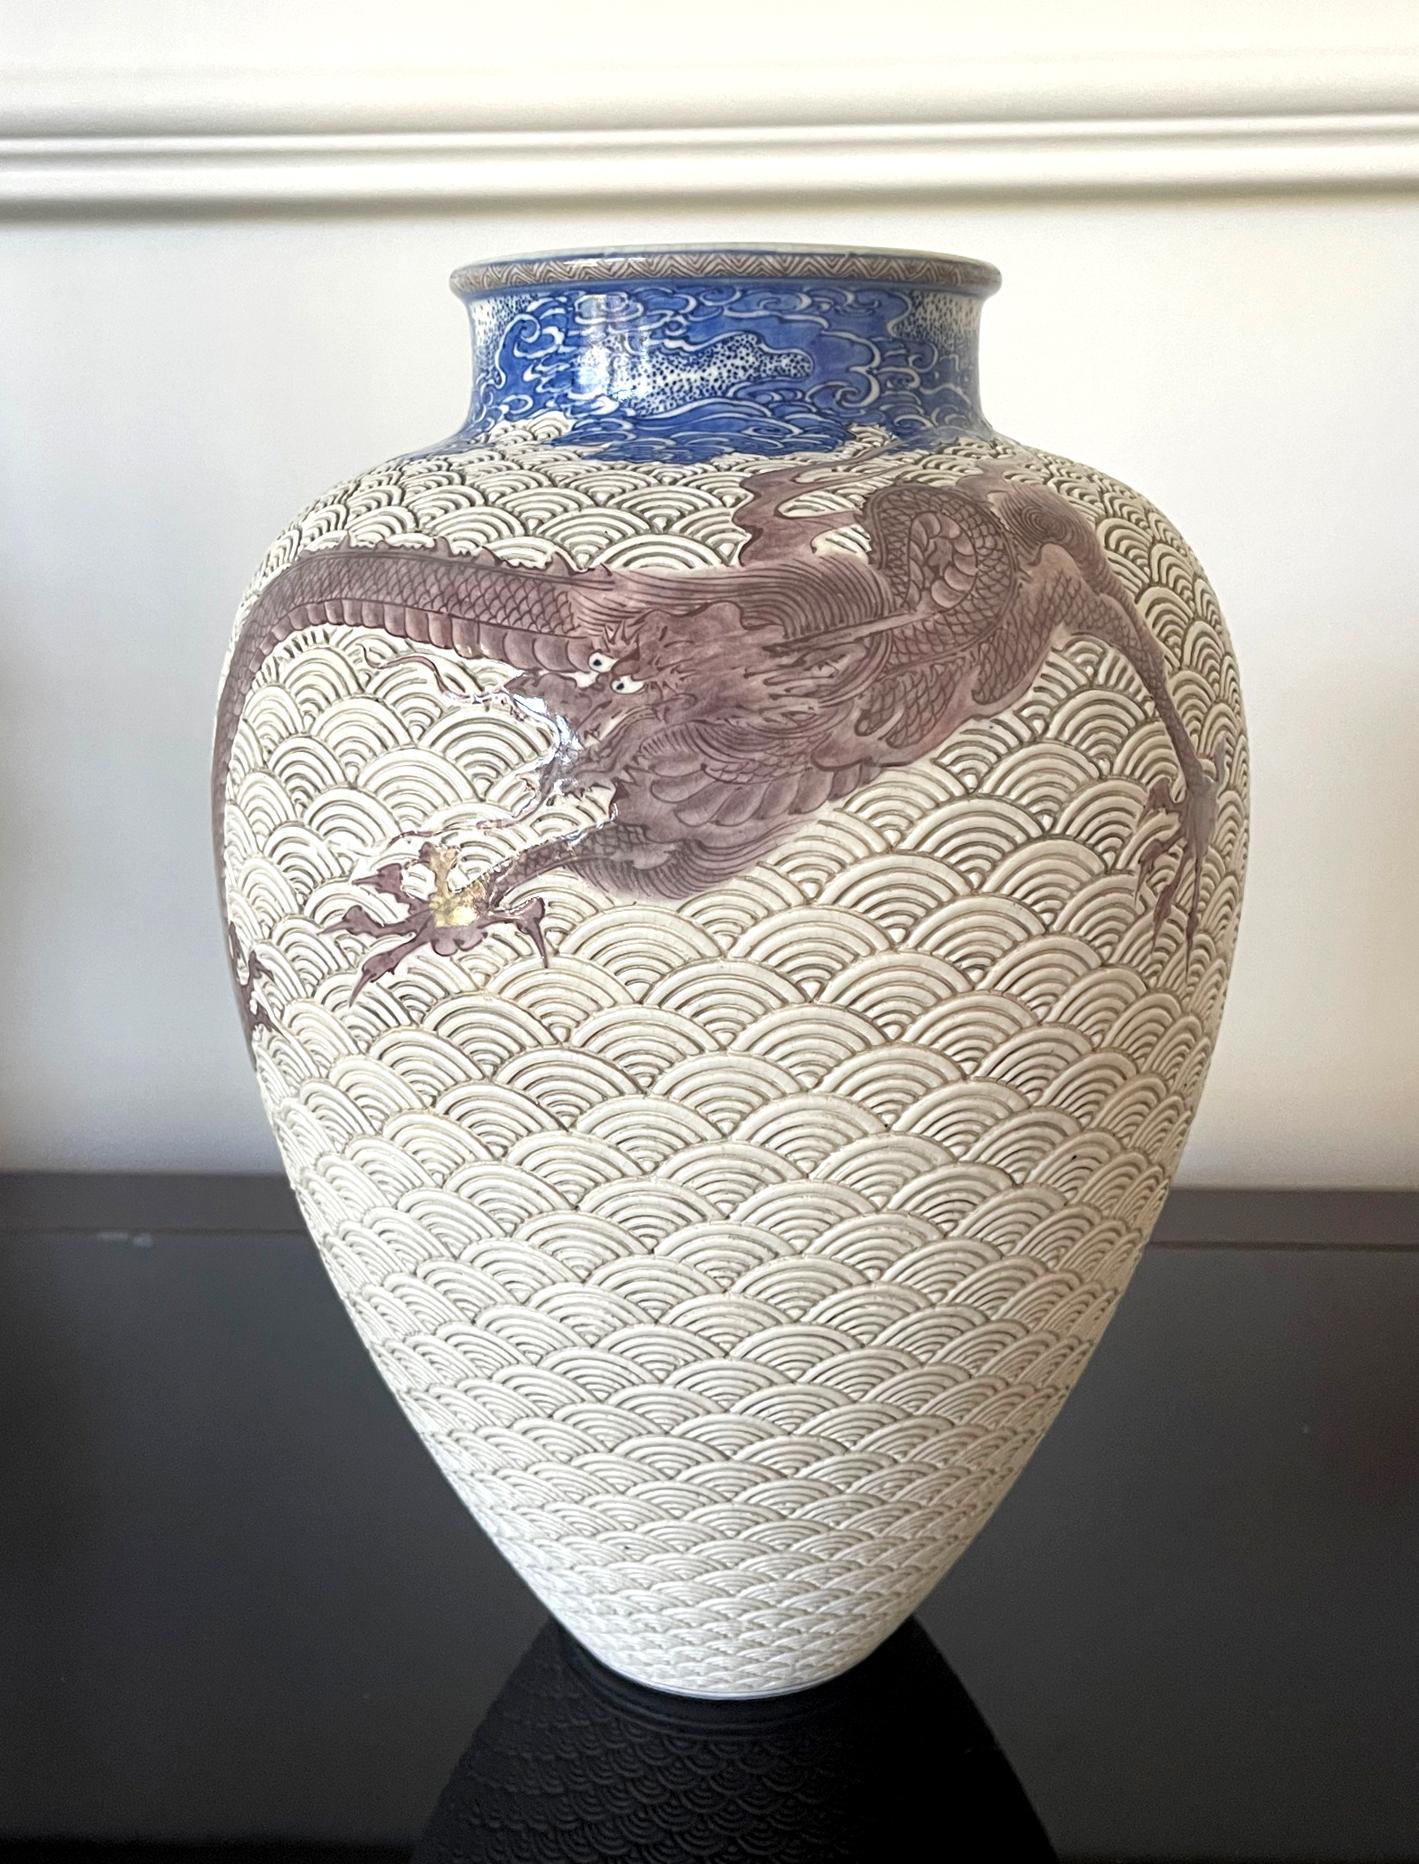 A large Japanese ceramic vase by the celebrated Meiji imperial potter Makuzu Kozan (1842-1916) circa 1880-1890s. Dated to his underglaze phase post 1887 after he successfully mastered the new colors available from the west and used them to the best